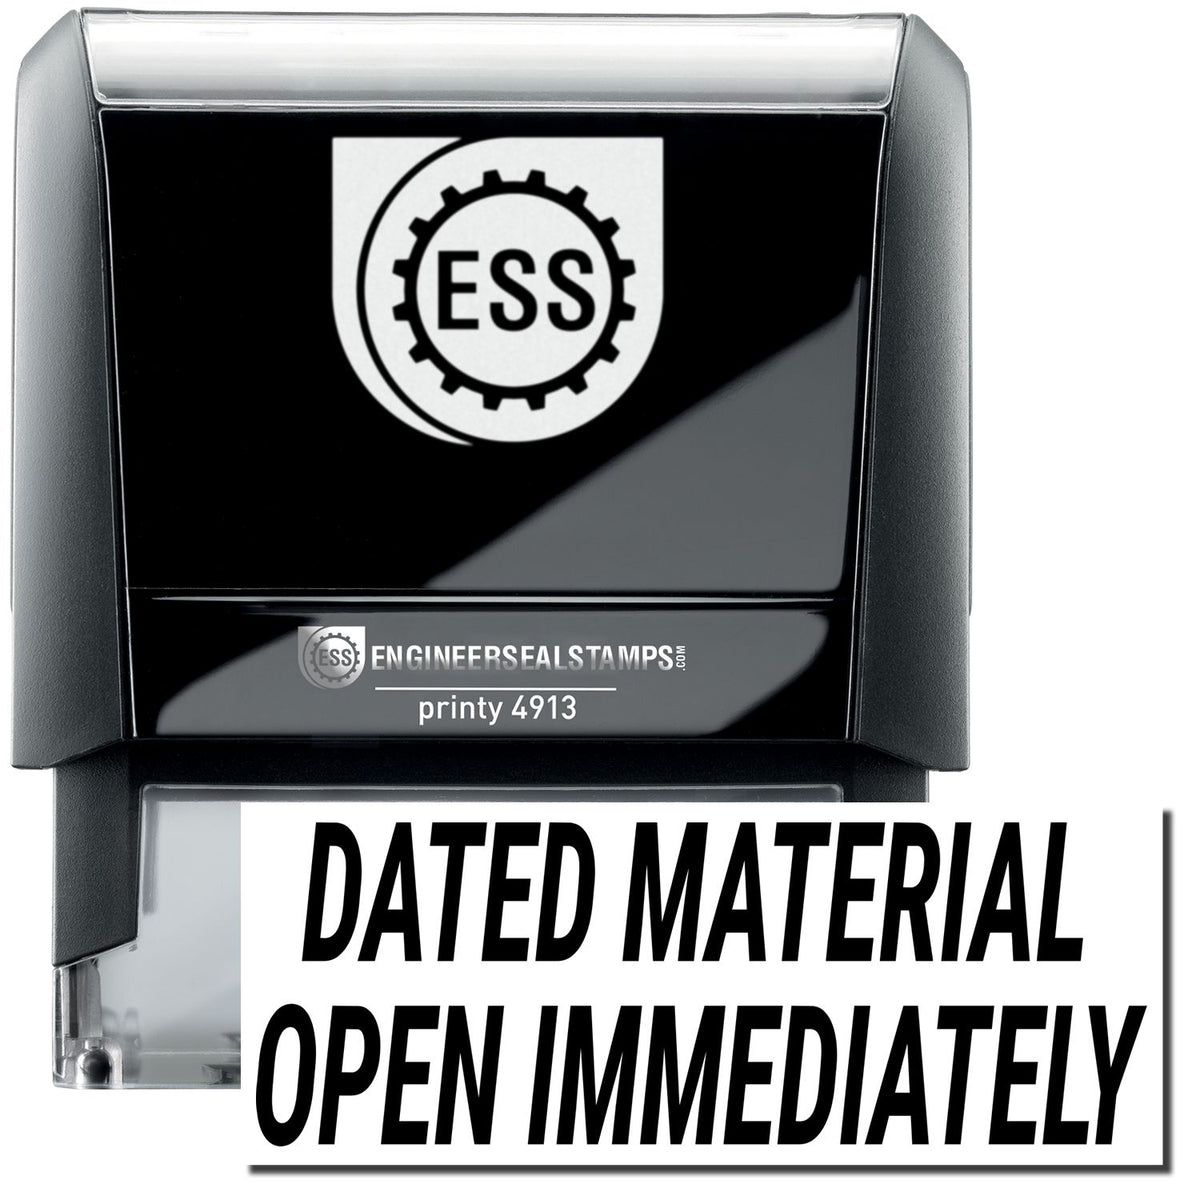 A self-inking stamp with a stamped image showing how the text &quot;DATED MATERIAL OPEN IMMEDIATELY&quot; in a large italic font is displayed by it after stamping.